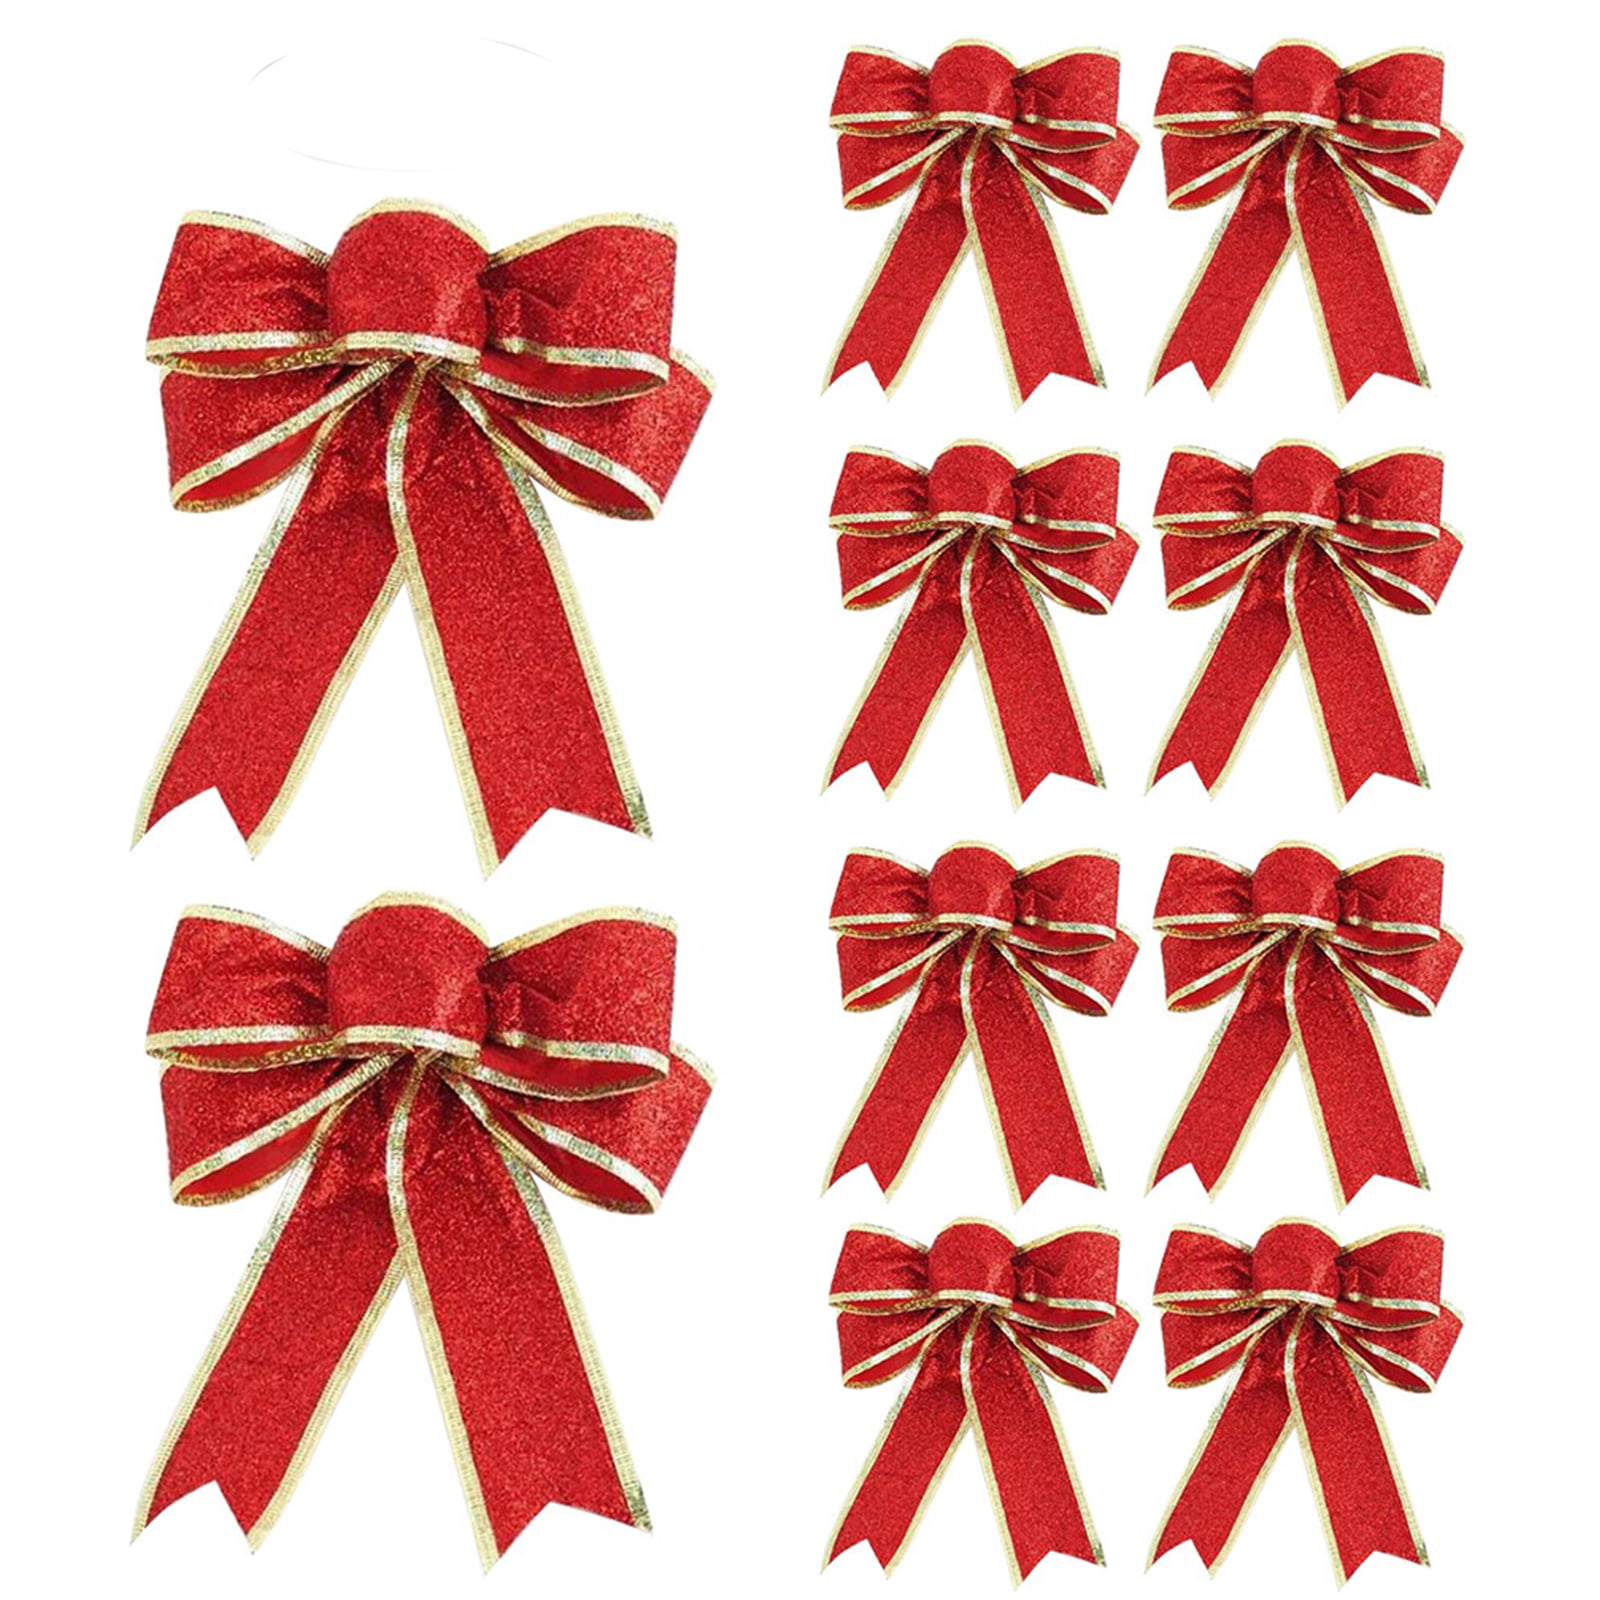 PVC 3 Large Decorative Ribbons Birthday 18 x 17 x 2 cm Silver Ornament Christmas Relaxdays Glitter Gift Bow Set of 3 